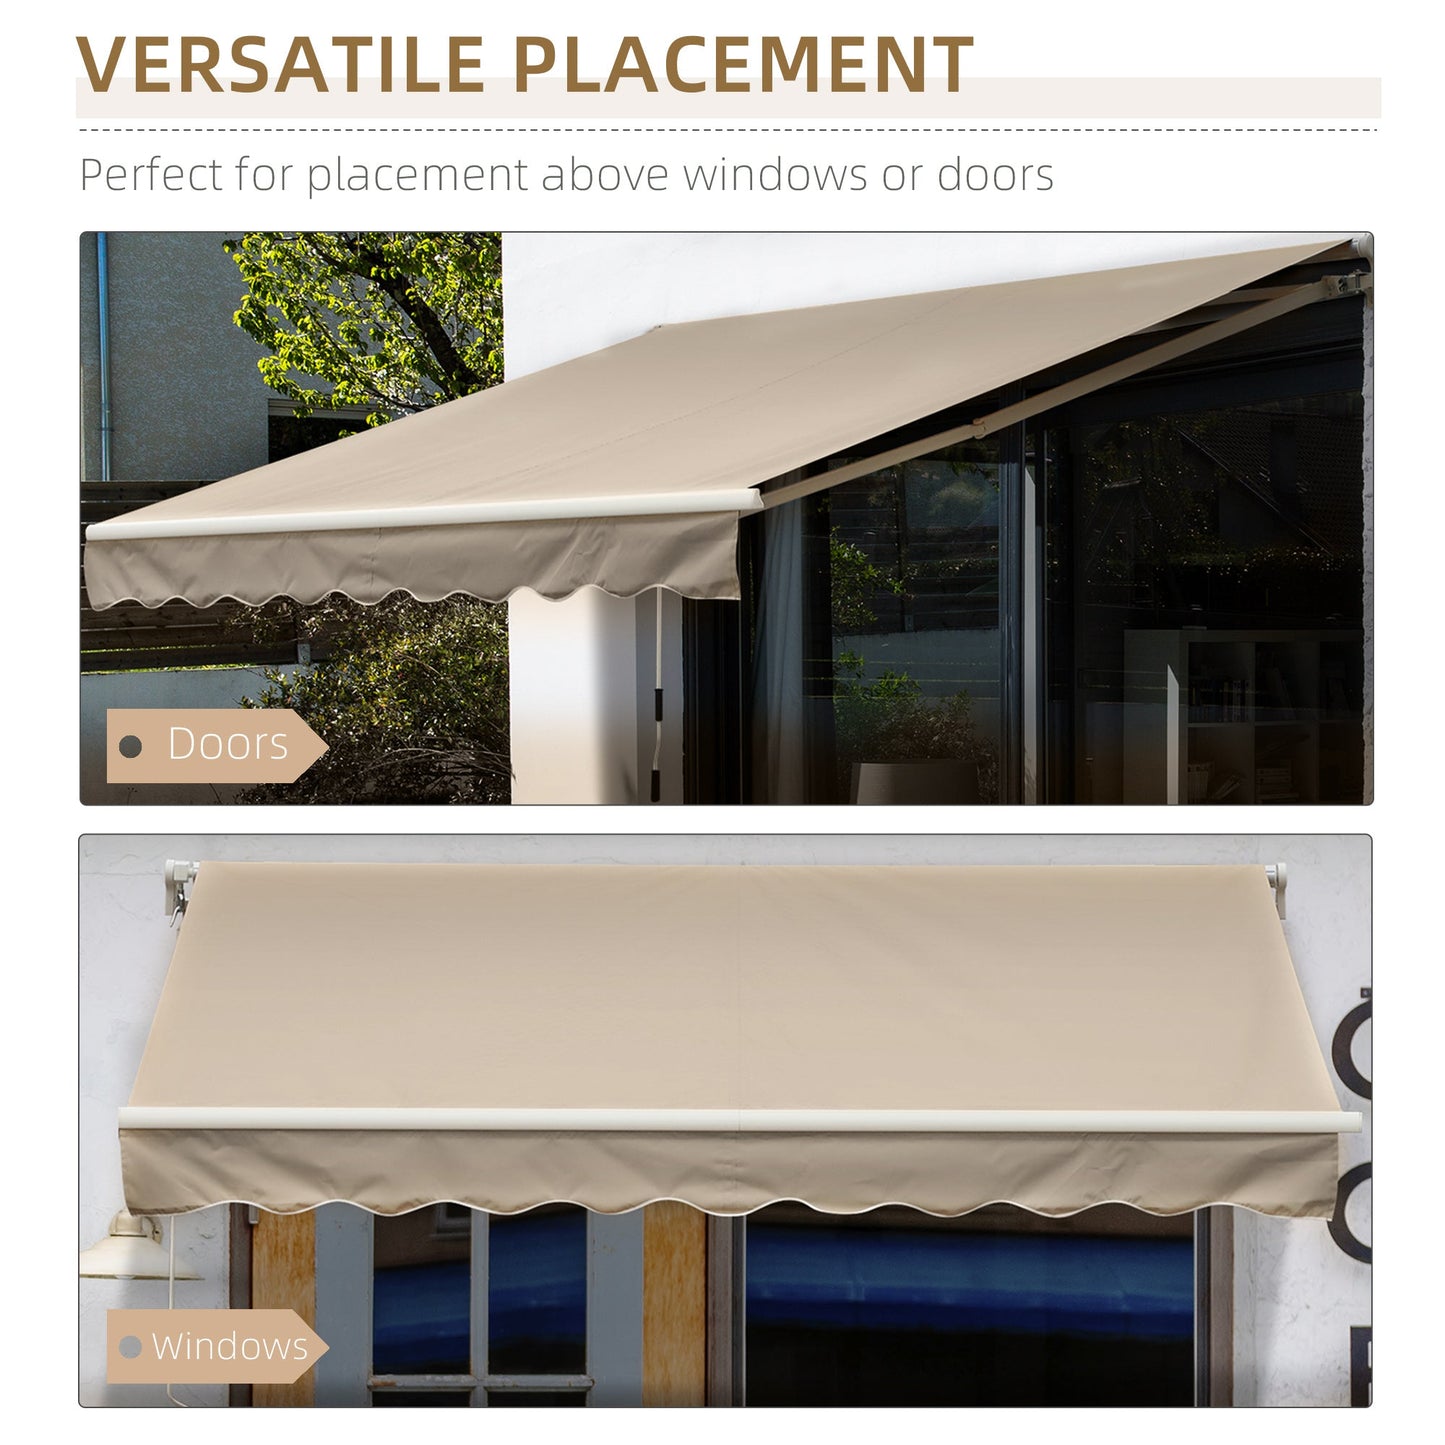 Outdoor and Garden-Retractable Awning 12' x 10' Manual Outdoor Sunshade Shelter for Patio, Balcony, Yard, with Adjustable & Versatile Design, Beige - Outdoor Style Company